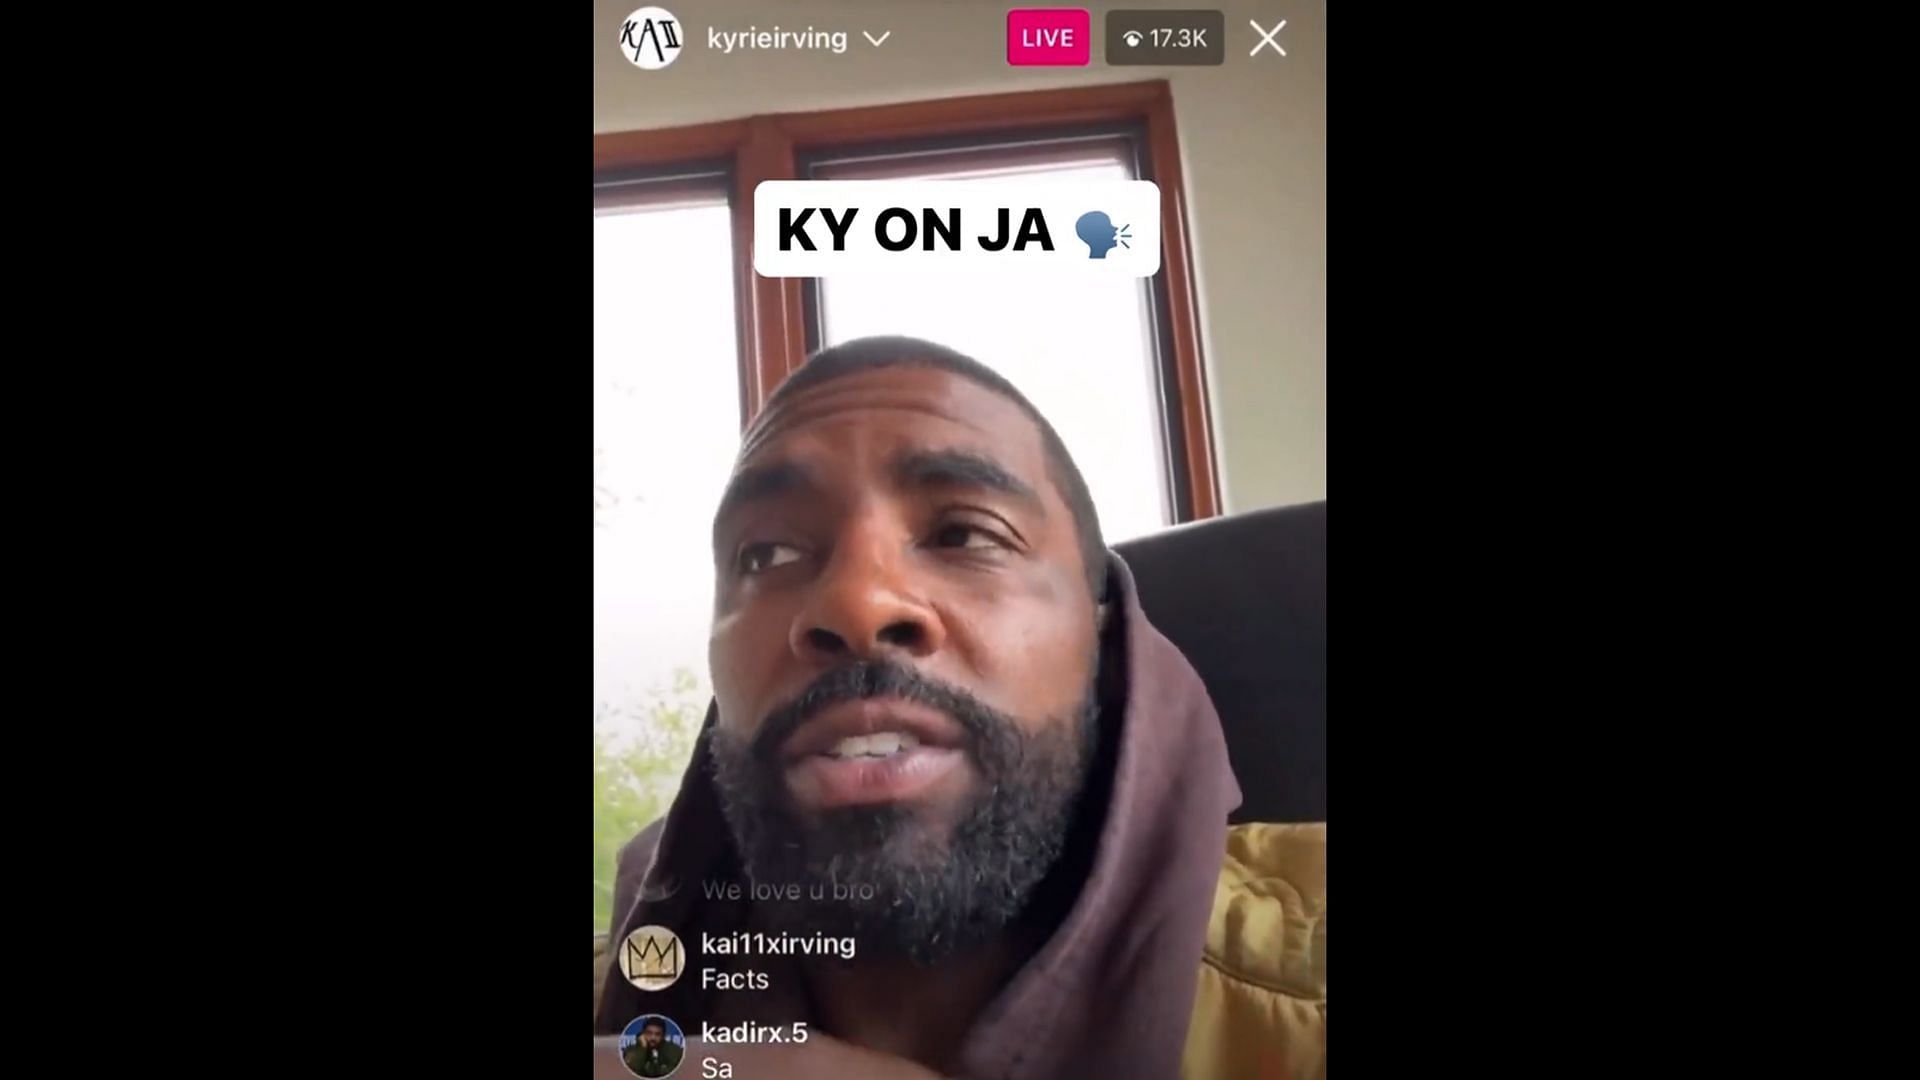 Kyrie Irving shares a message with Ja Morant